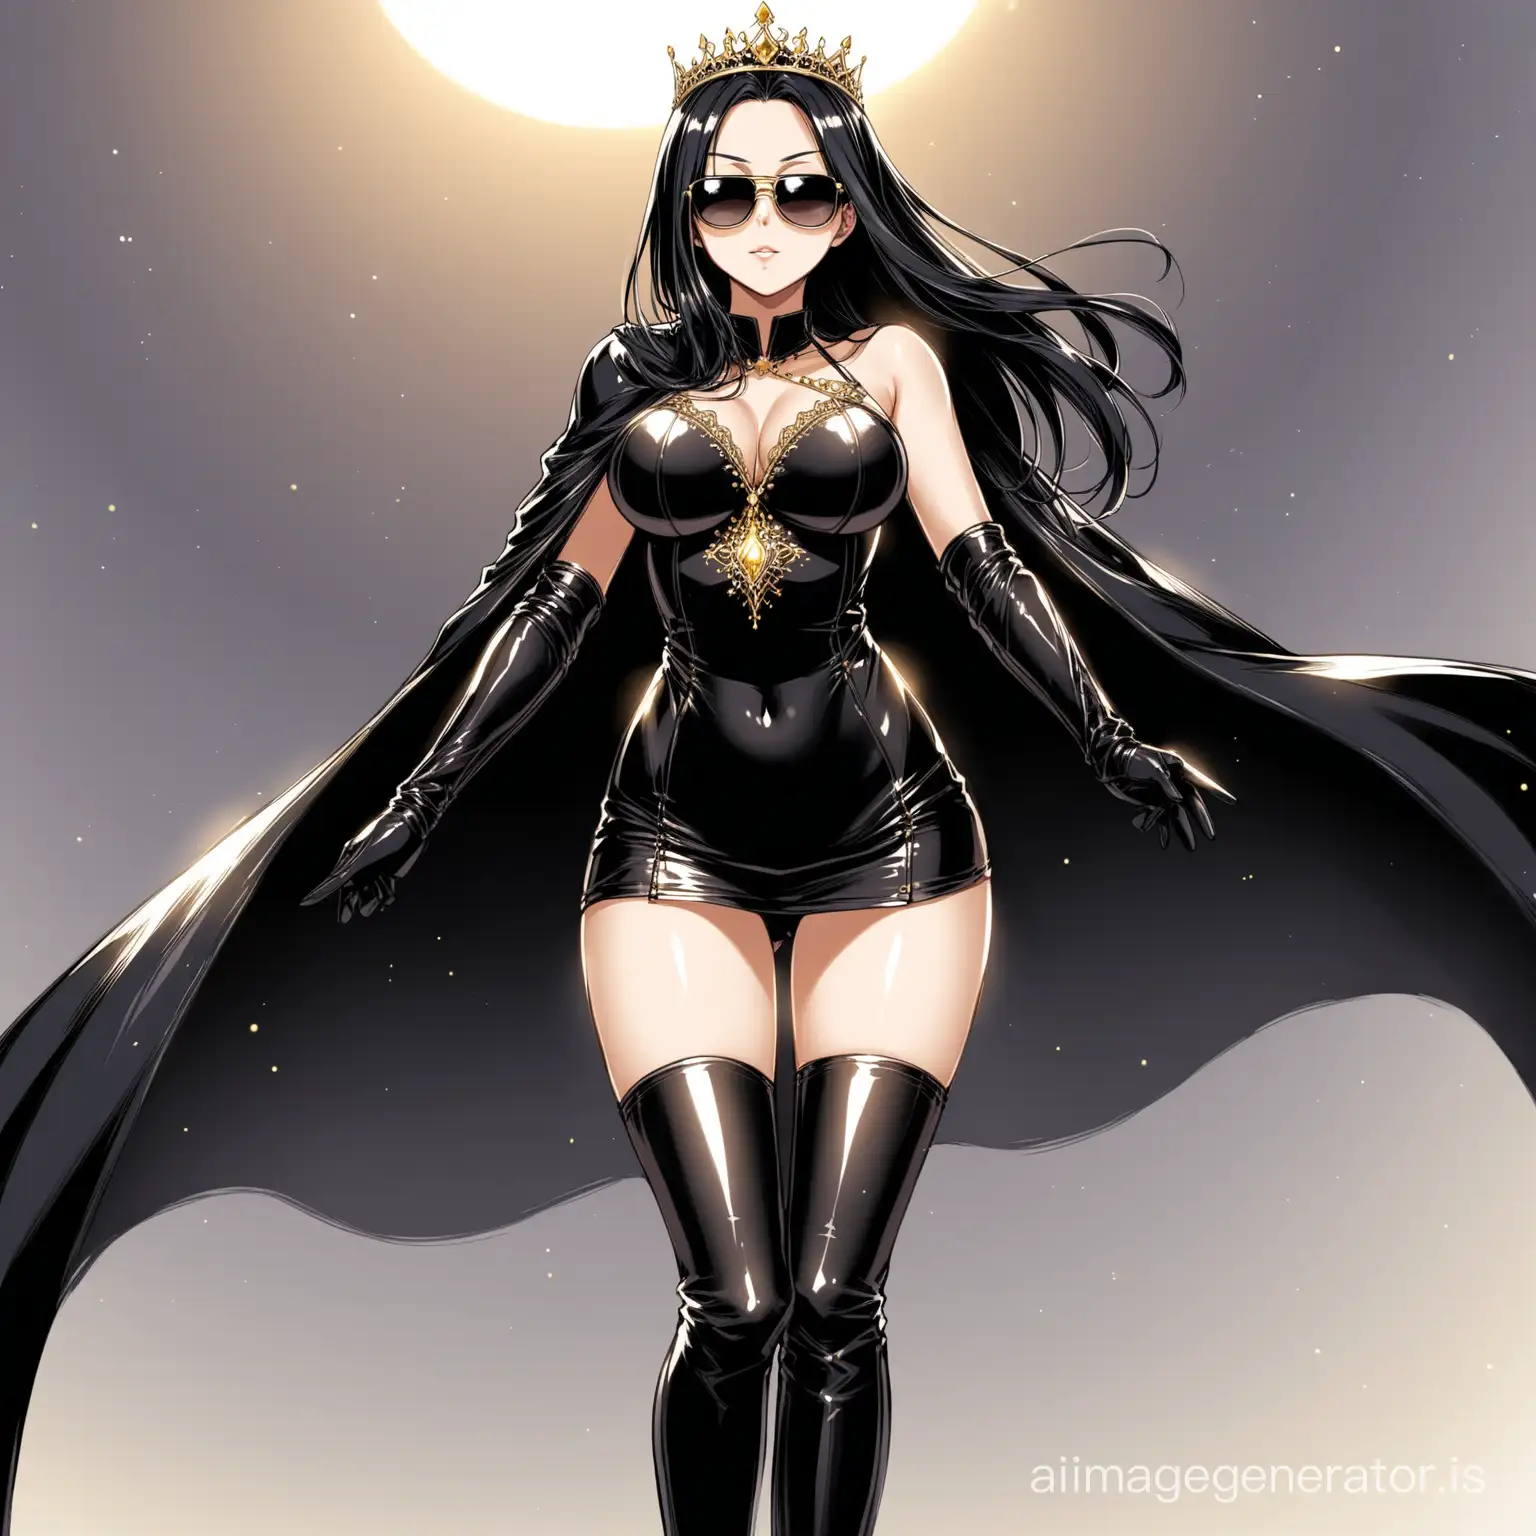 hot anime girl with long and beautiful black hair dressed in a black one piece dress with a leather skirt reaching above her thighs. she is also wearing a long black cape starting from her shoulders till the legs. she also wears a pair long black leather gloves and a pair tall leather boots. she wears a pair of cool shades and she looks royal by wearing a golden tiara